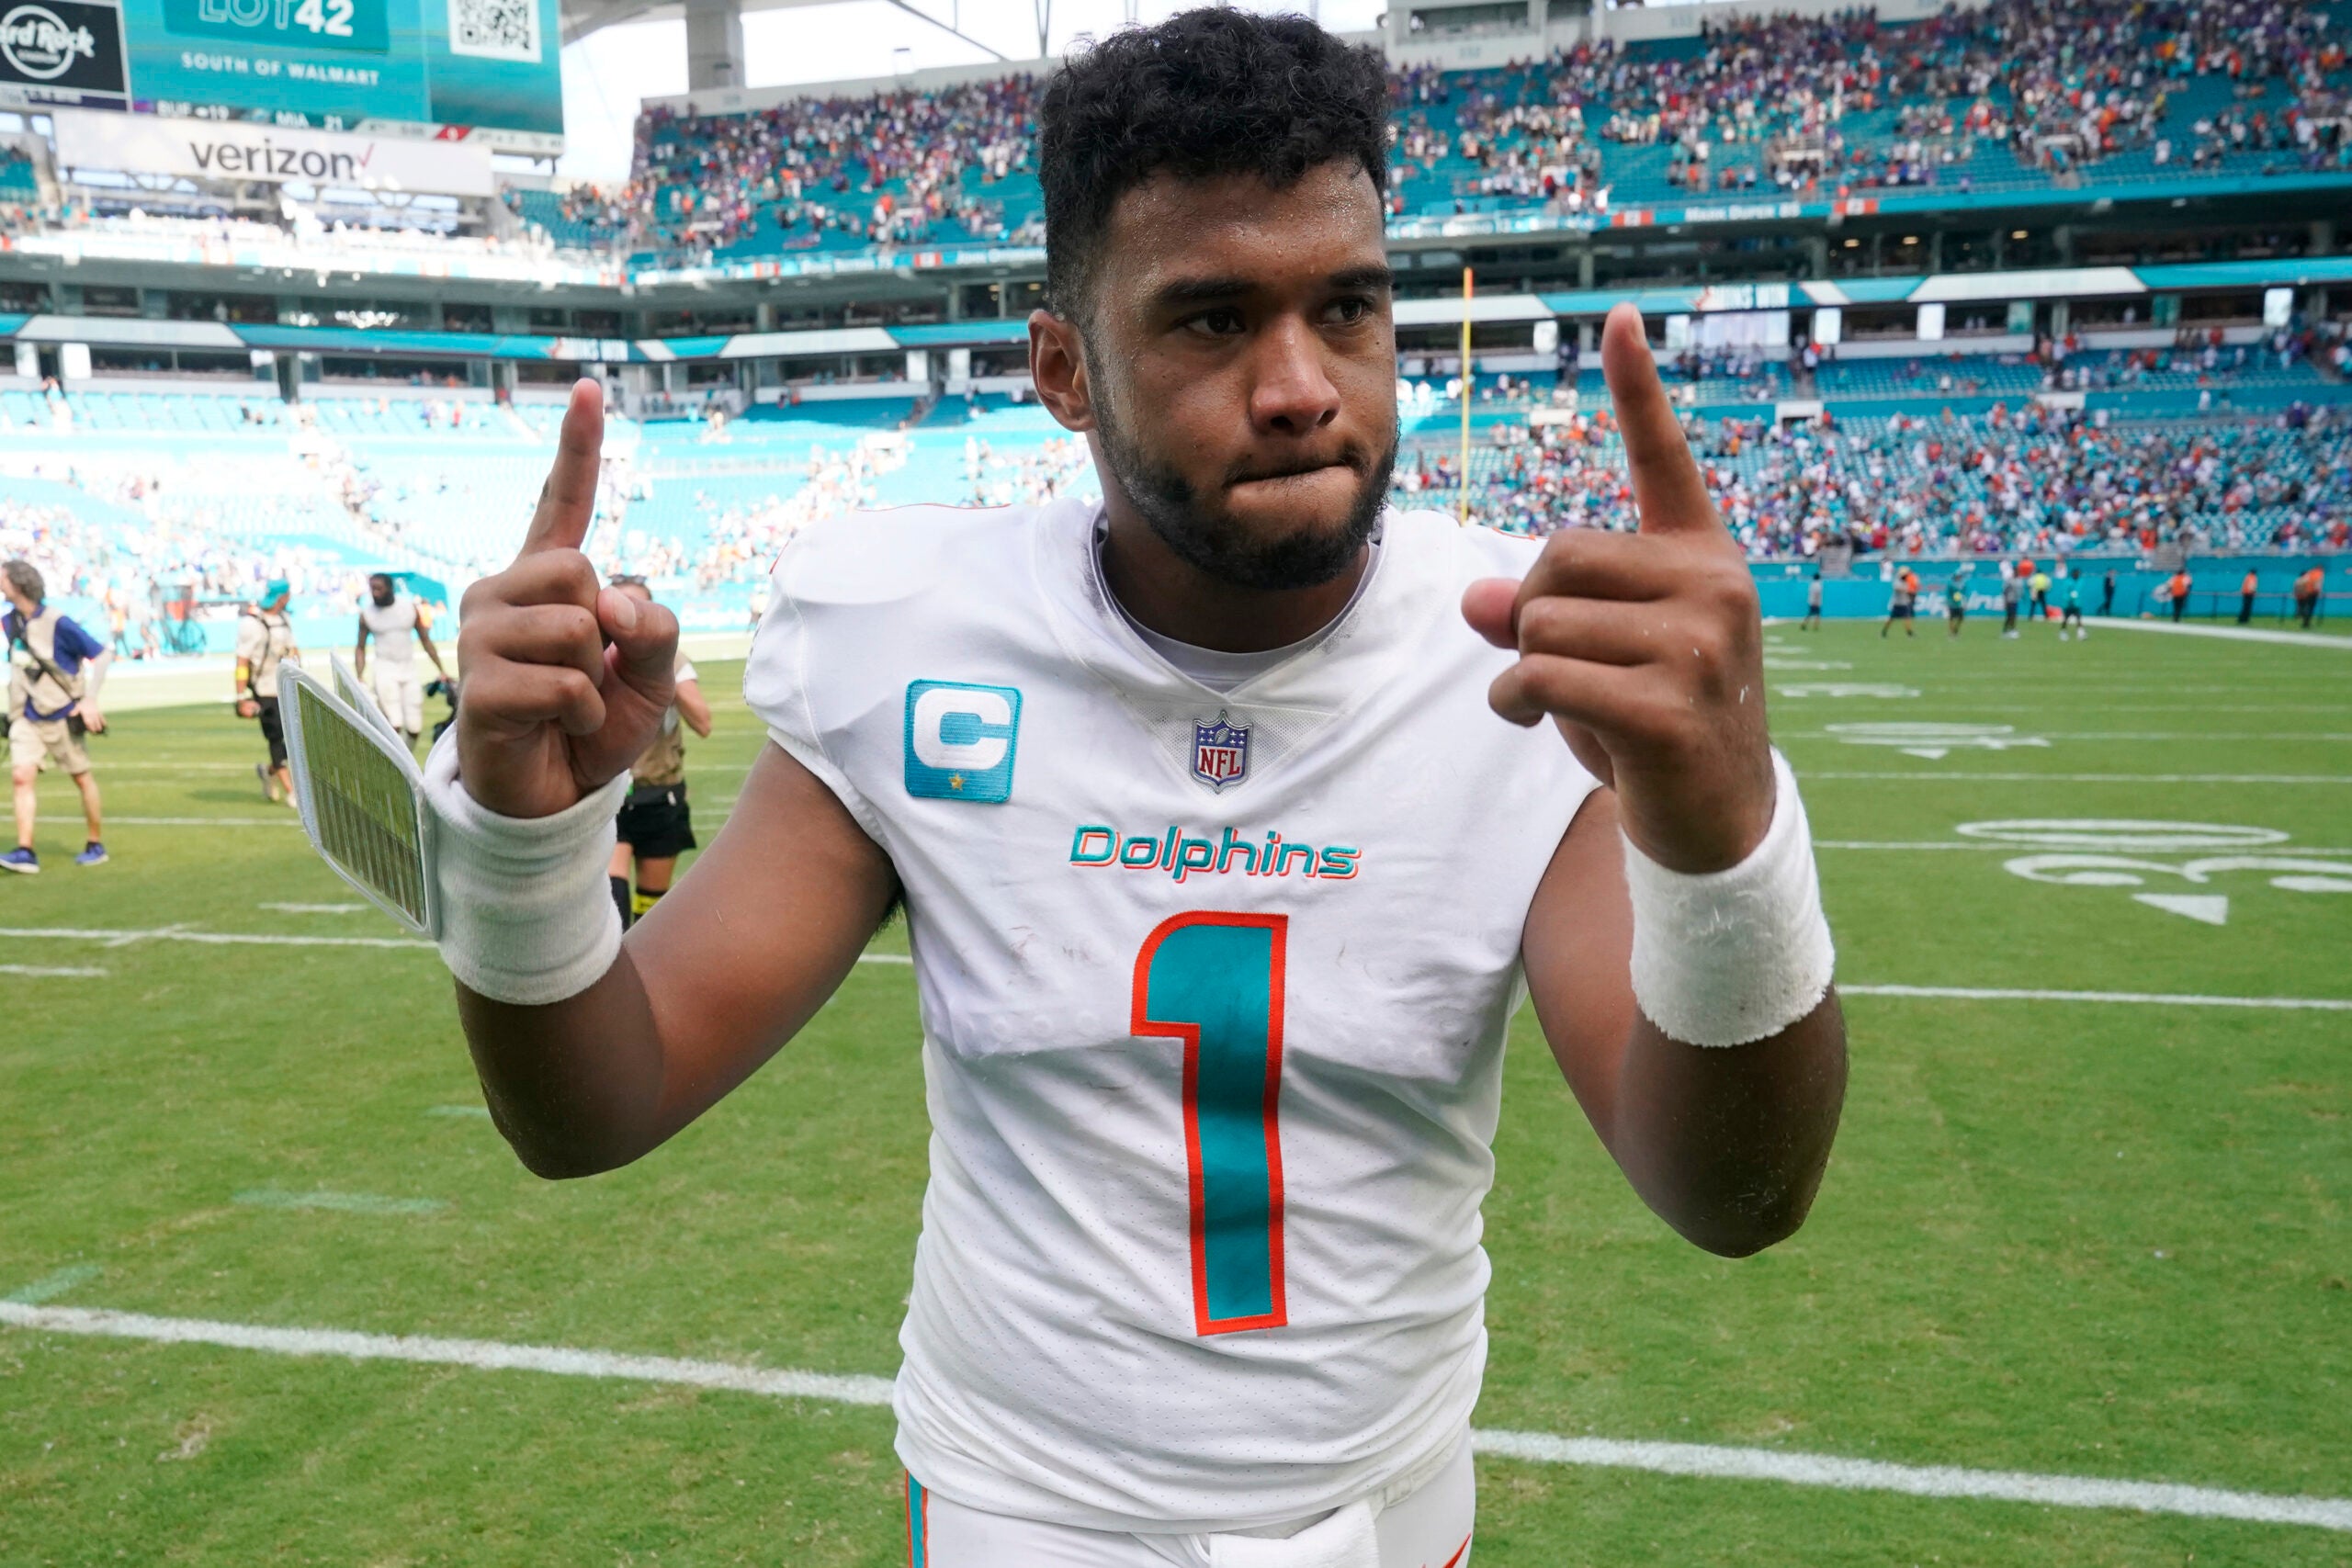 Miami Dolphins quarterback Tua Tagovailoa (1) gestures at the end of an NFL football game against the Buffalo Bills, Sunday, Sept. 25, 2022, in Miami Gardens, Fla.